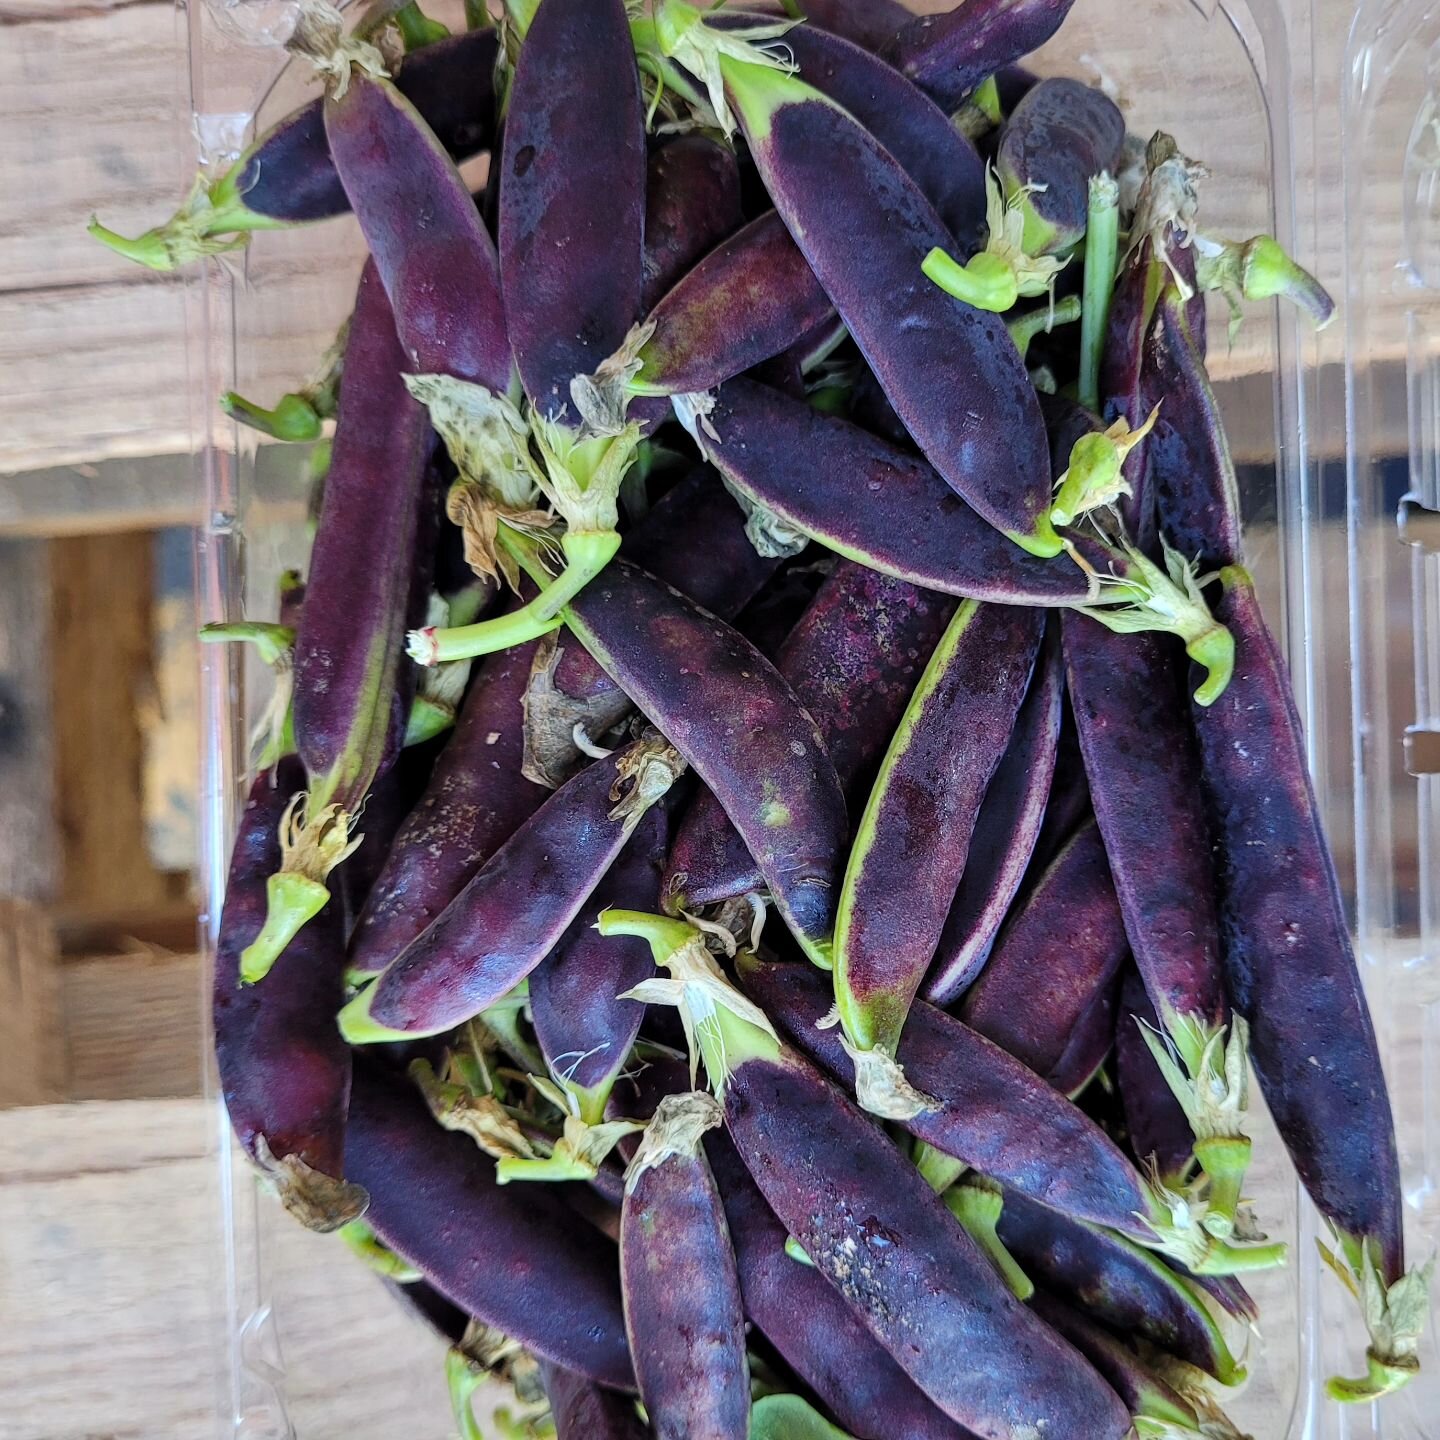 Gorgeous purple snap peas from Comanche Creek Farm in Chico. Eat fresh and crunchy to keep the purple color. Once cooked the purple color will disappear. #springveggies #comanchecreekfarms #producethatinspires #passion4organic #followtheflavor #flavo